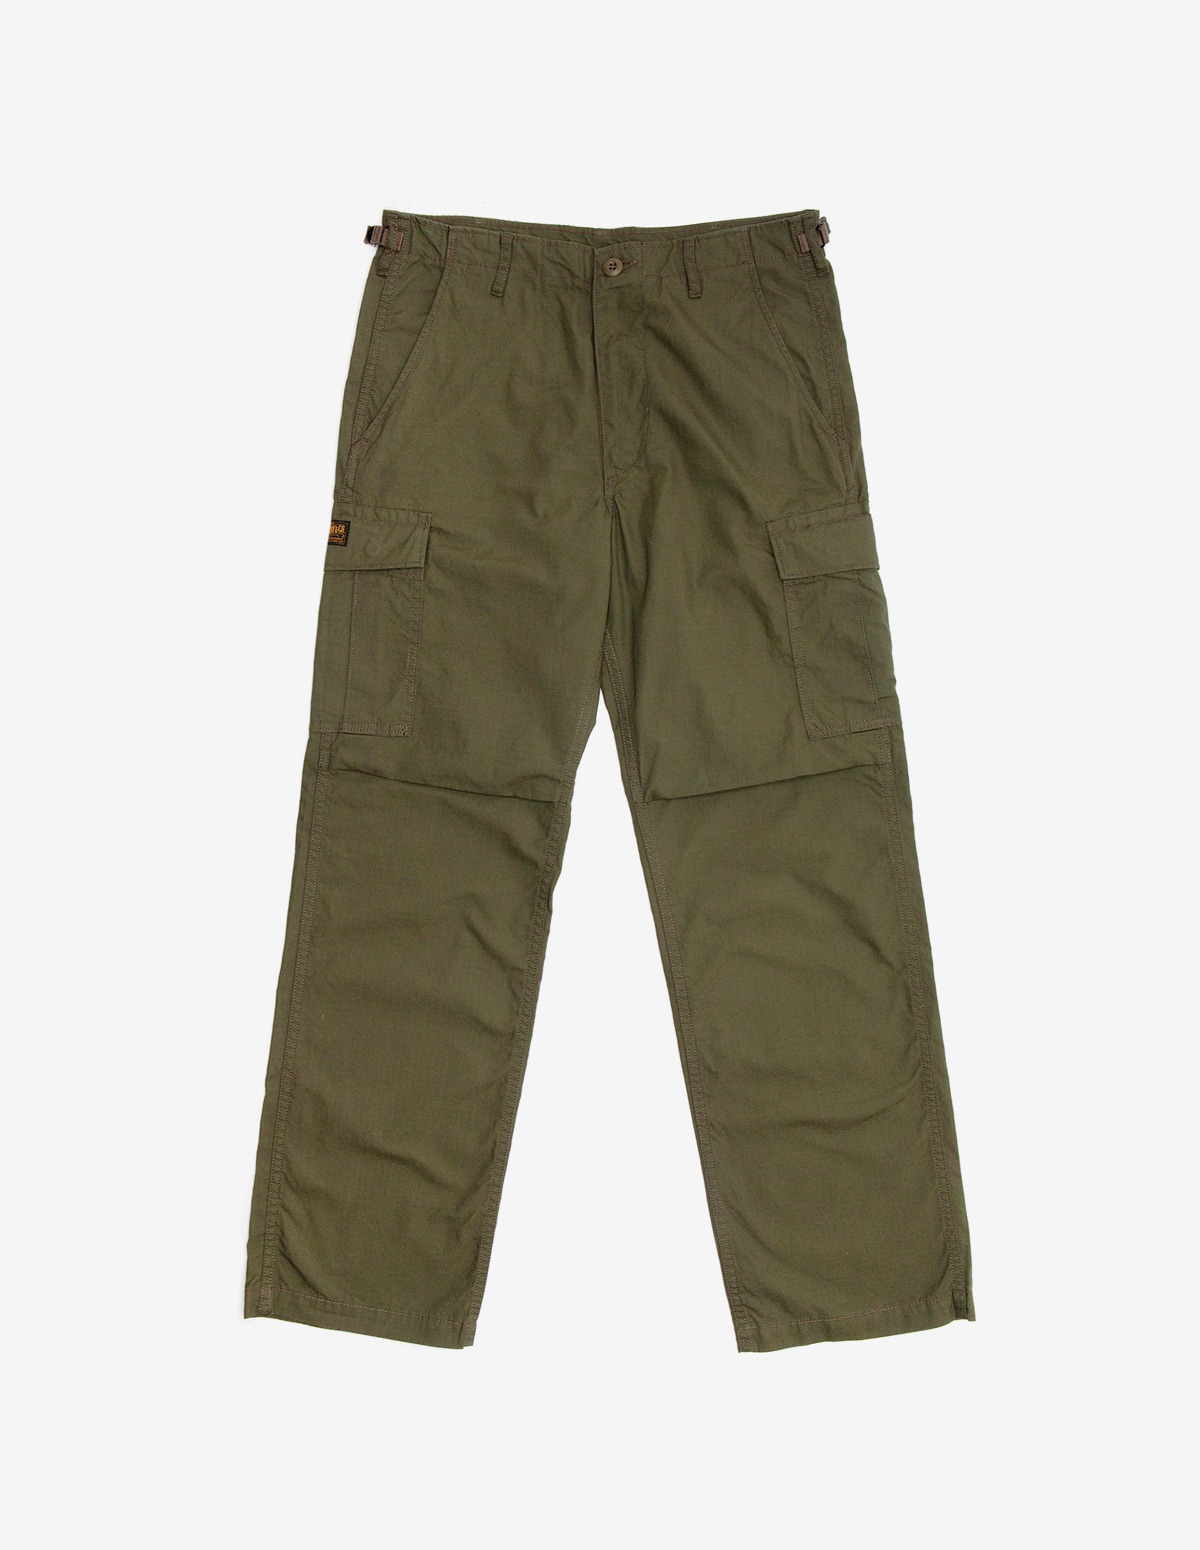 TMP2101 MILITARY HOT WEATHER TROUSERS RIPSTOP